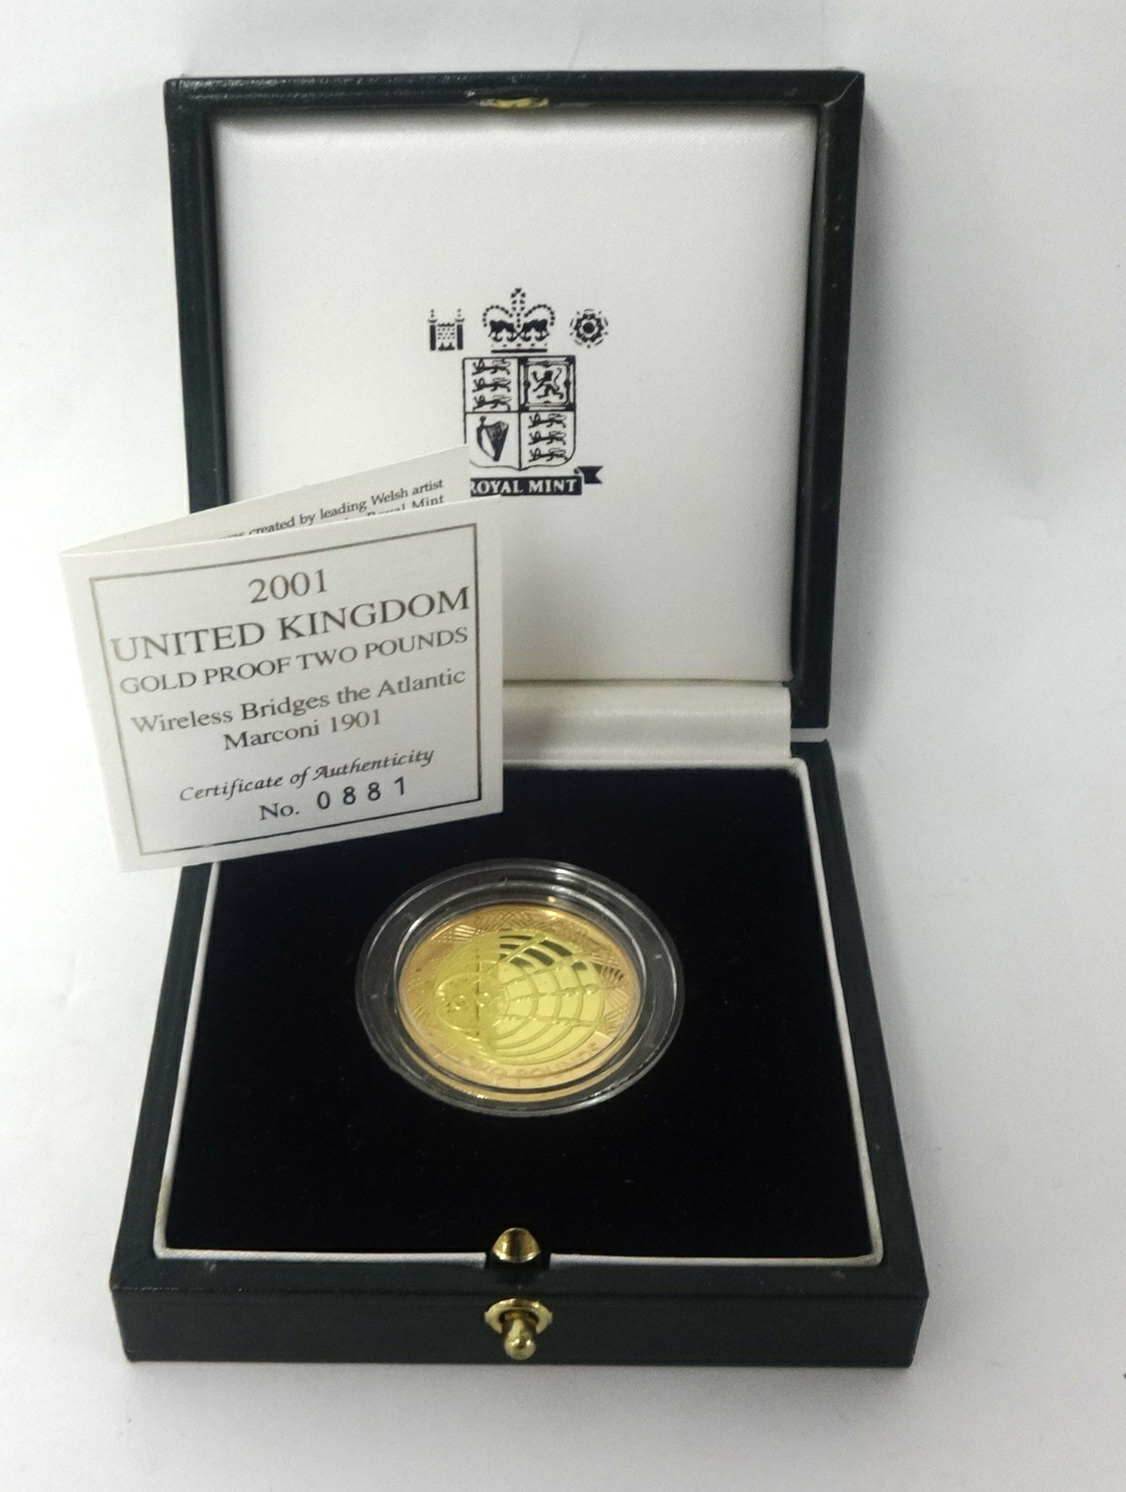 Royal Mint UK gold proof two pound coin (Marconi 1901), 22ct gold, 15.97g, 2001, cased